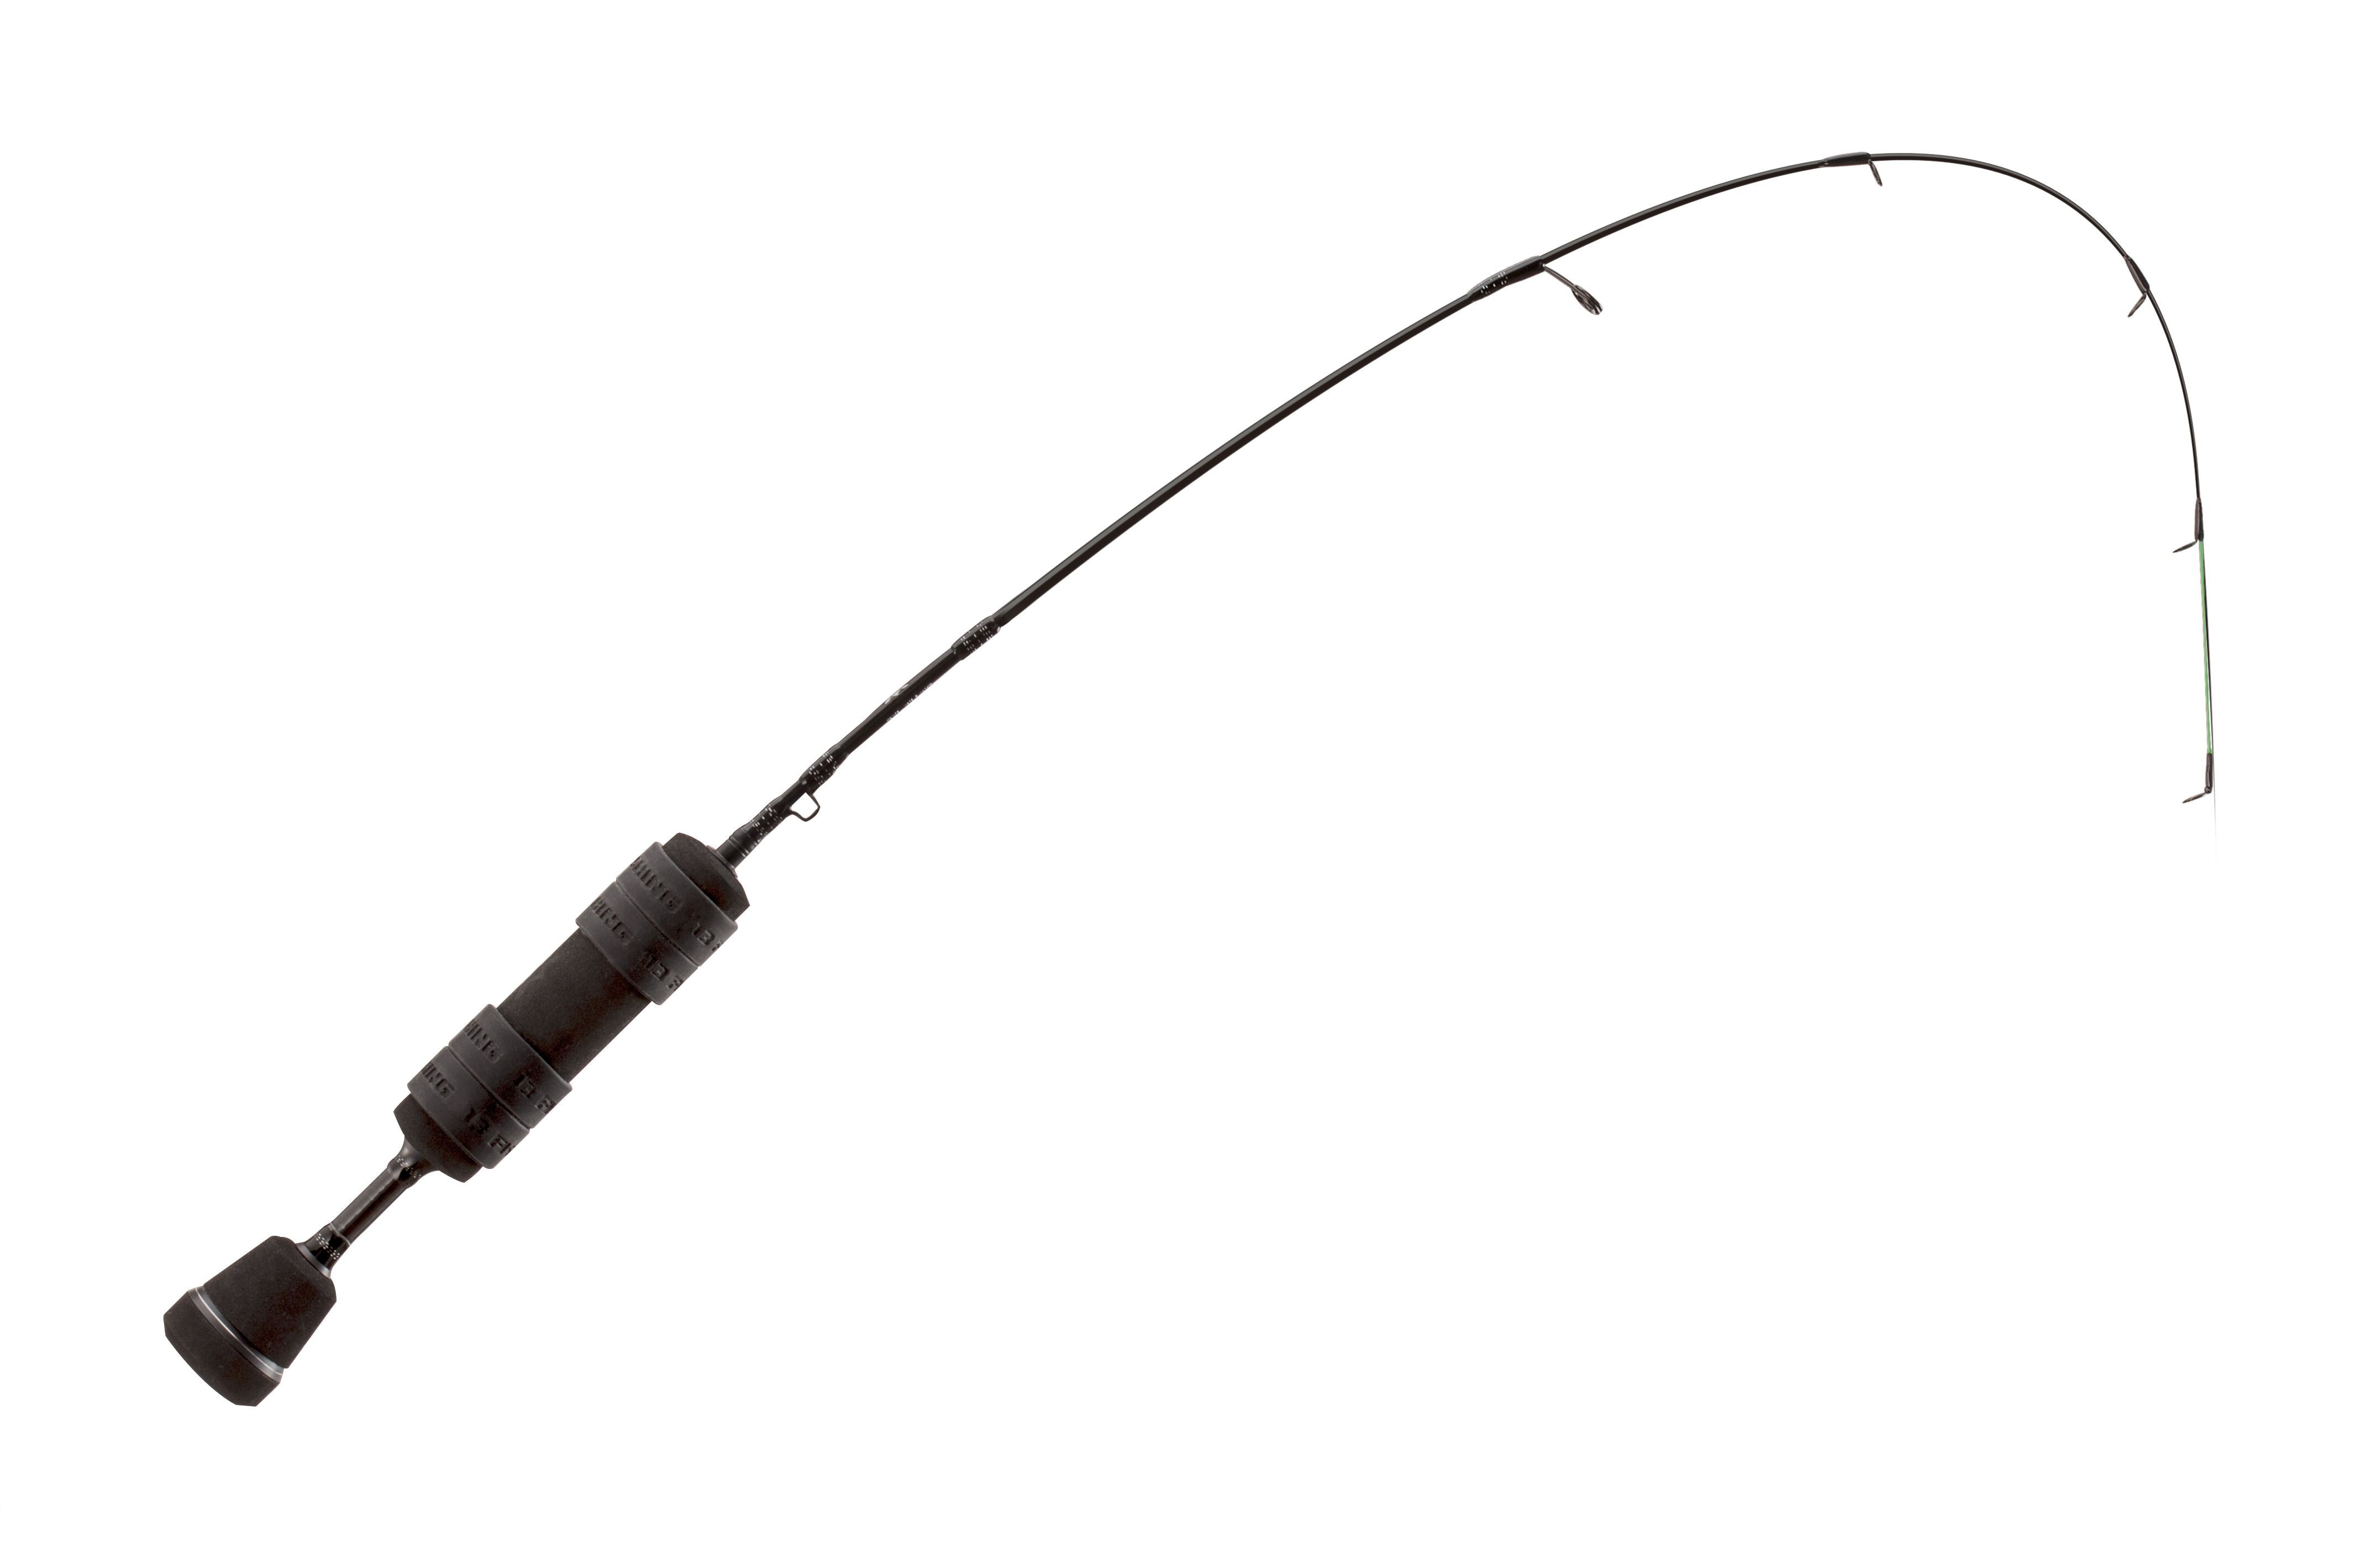 13 FISHING Widow Maker Ice Rod 27 68cm L (Light) - Tickle Stick Tip with  Tennessee Handle and Evolve Reel Wraps